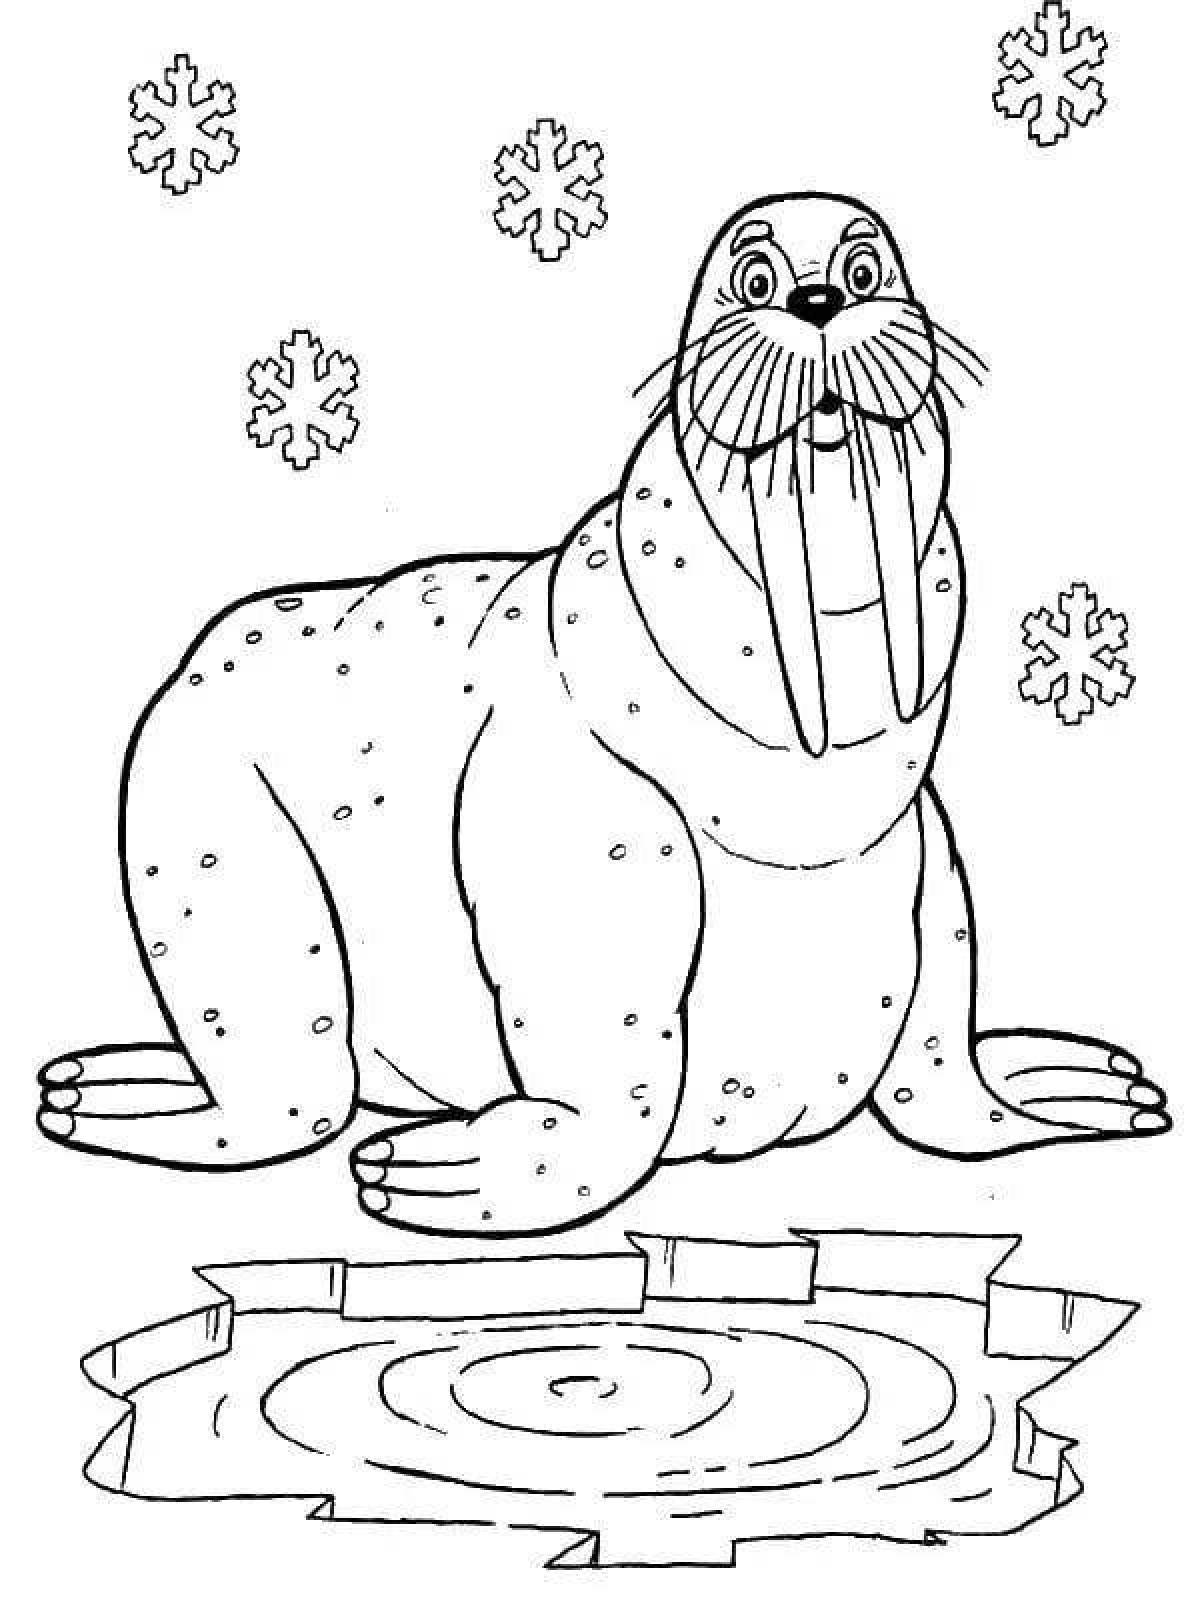 Animals of cold countries #7